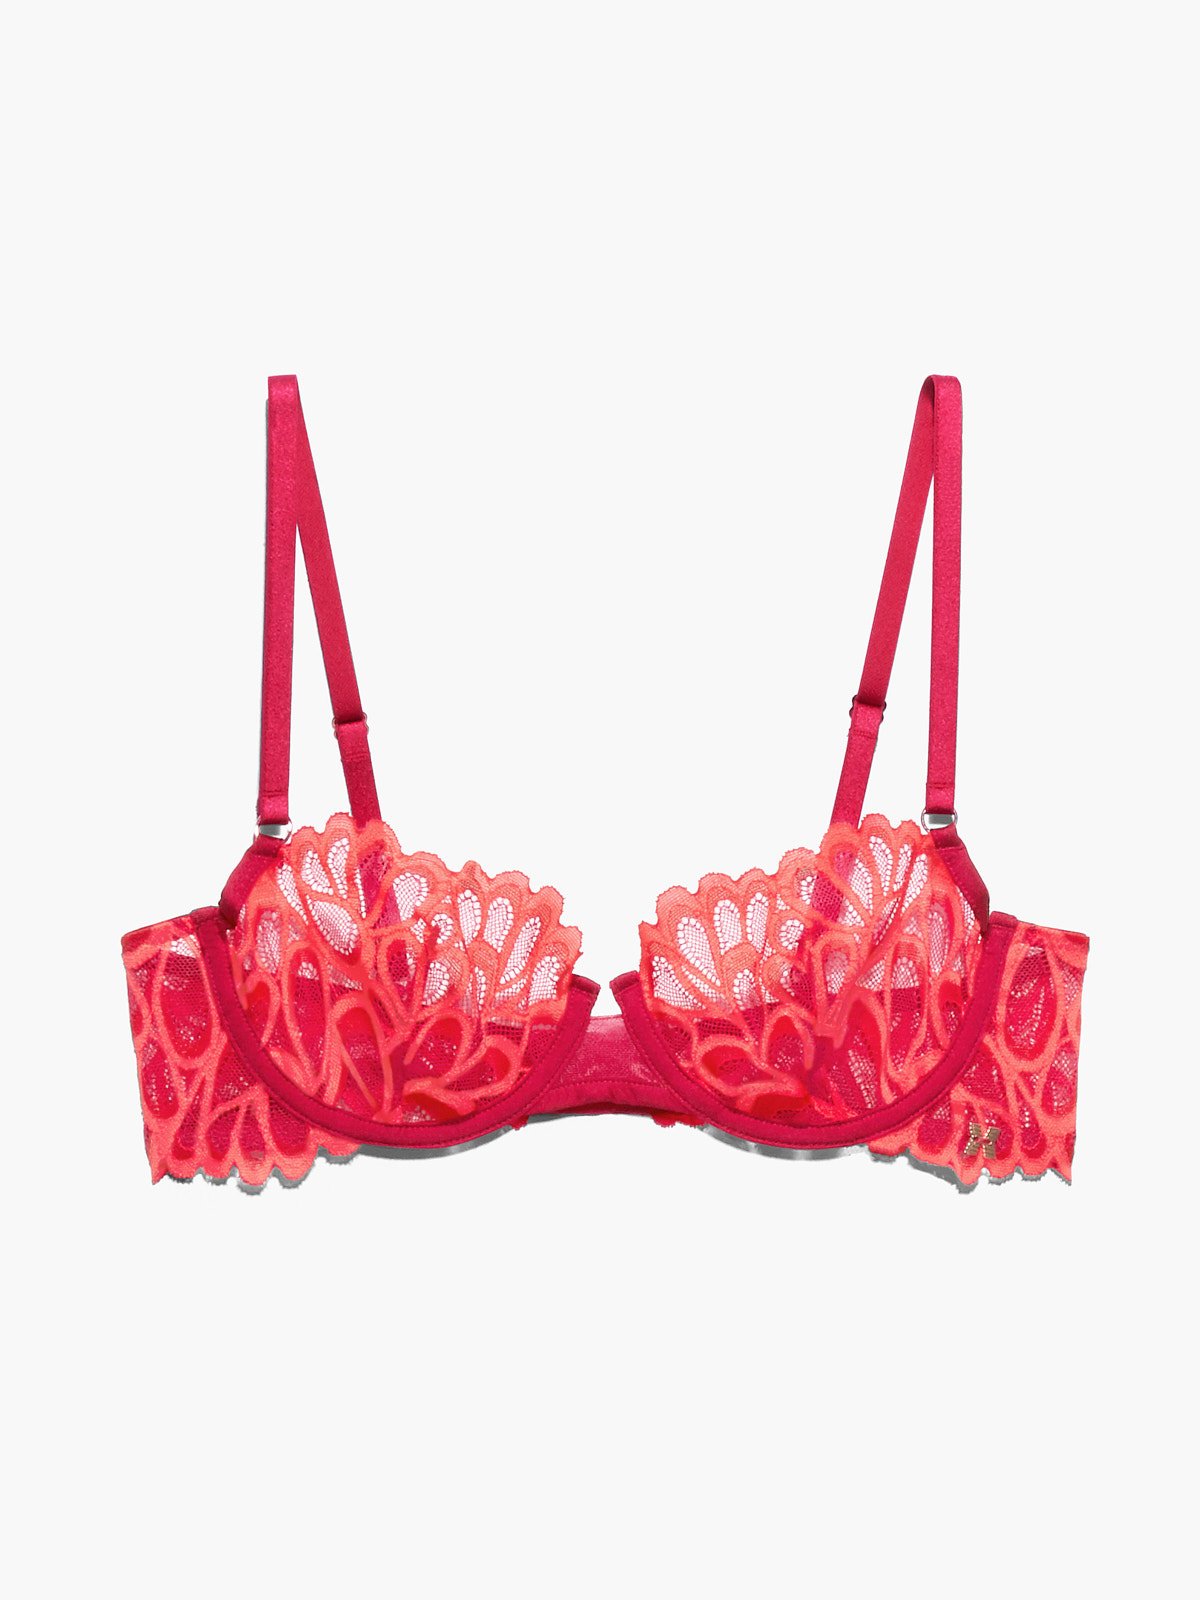 https://cdn.savagex.com/media/images/products/BA2042992-6222/SAVAGE-NOT-SORRY-UNLINED-LACE-BALCONETTE-BRA-BA2042992-6222-LAYDOWN-1200x1600.jpg